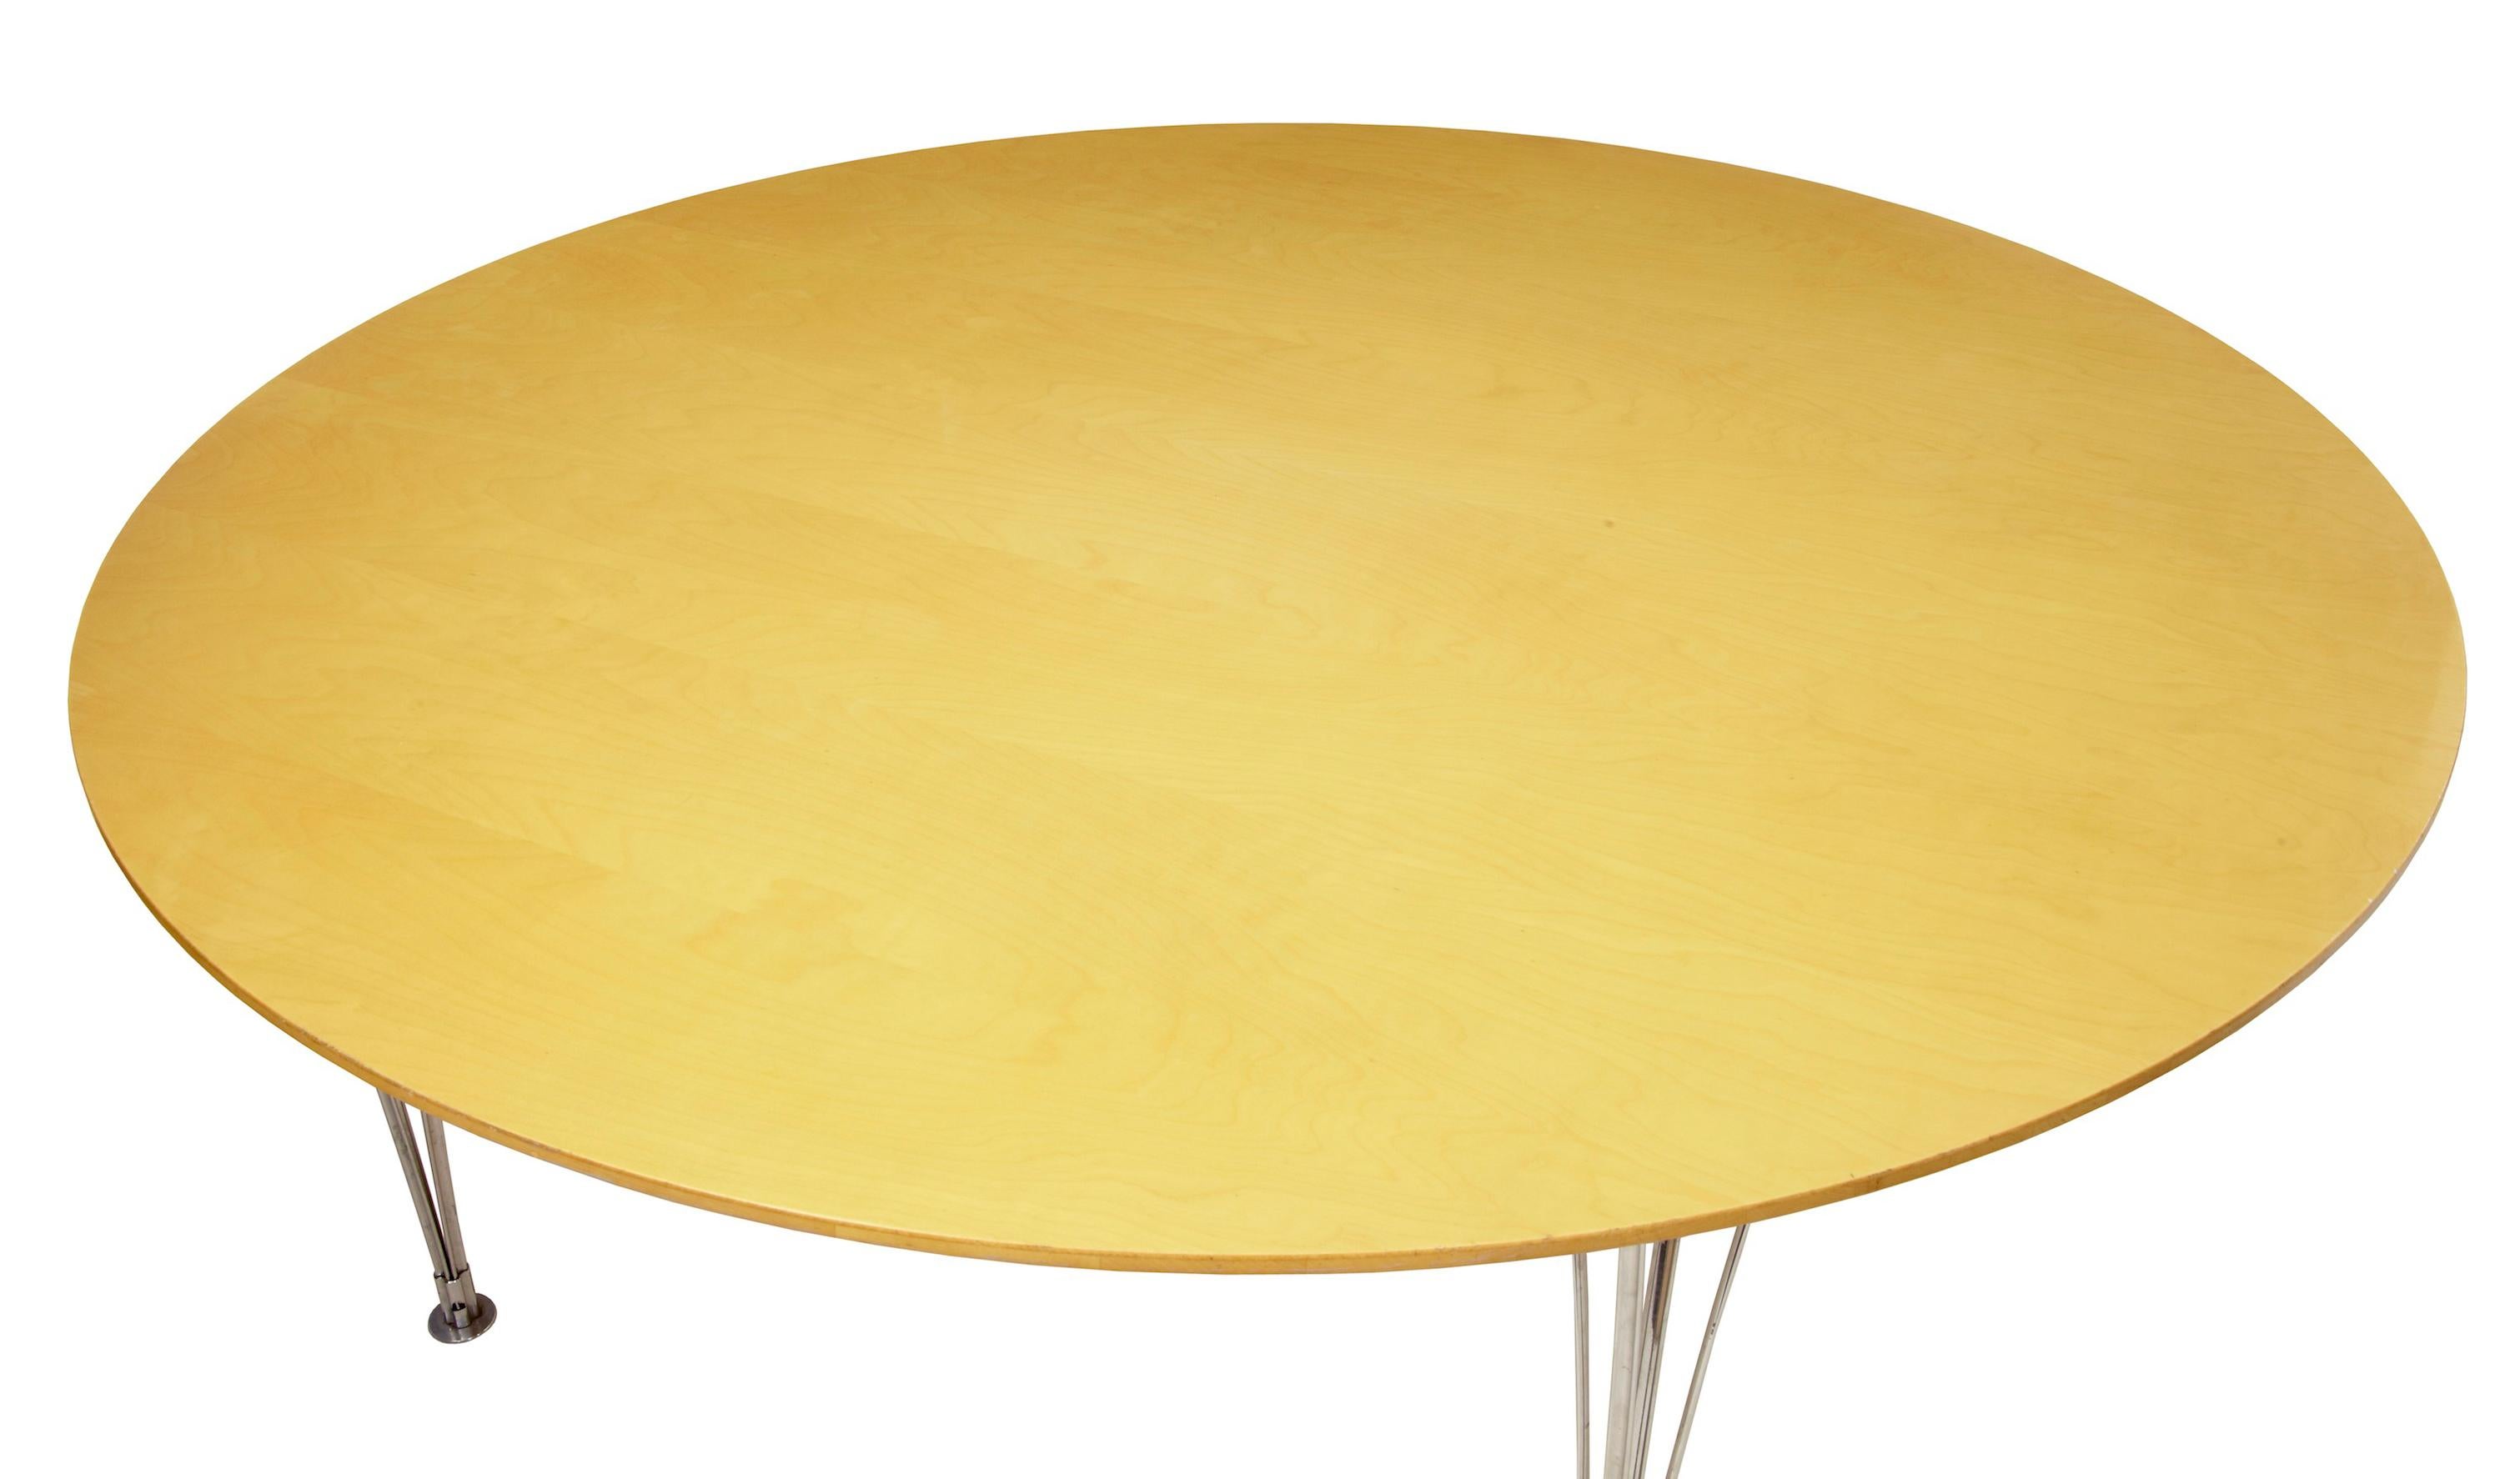 Large round Scandinavian Bruno Mathsson birch dining table, circa 1980.

Fine piece of known scandinavian furniture designer bruno mathsson. Seats 10. Detachable chromed legs allowing for cheaper transport.

Some marking and abrasions to outer